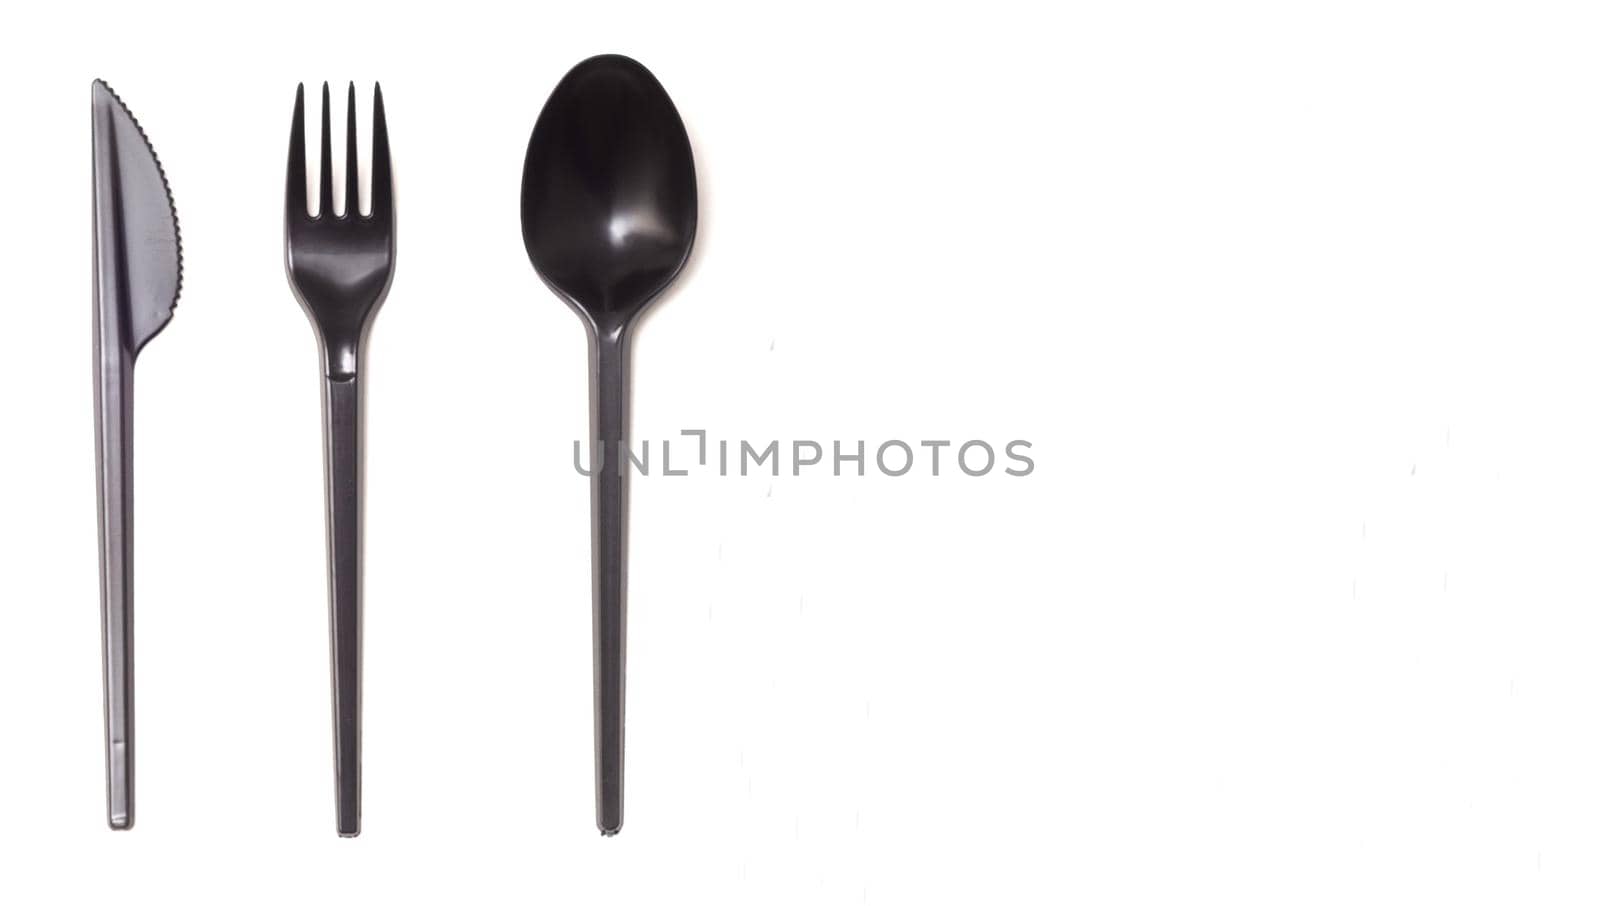 Repeating black plastic disposable knife,spoon on white background, copyspace.